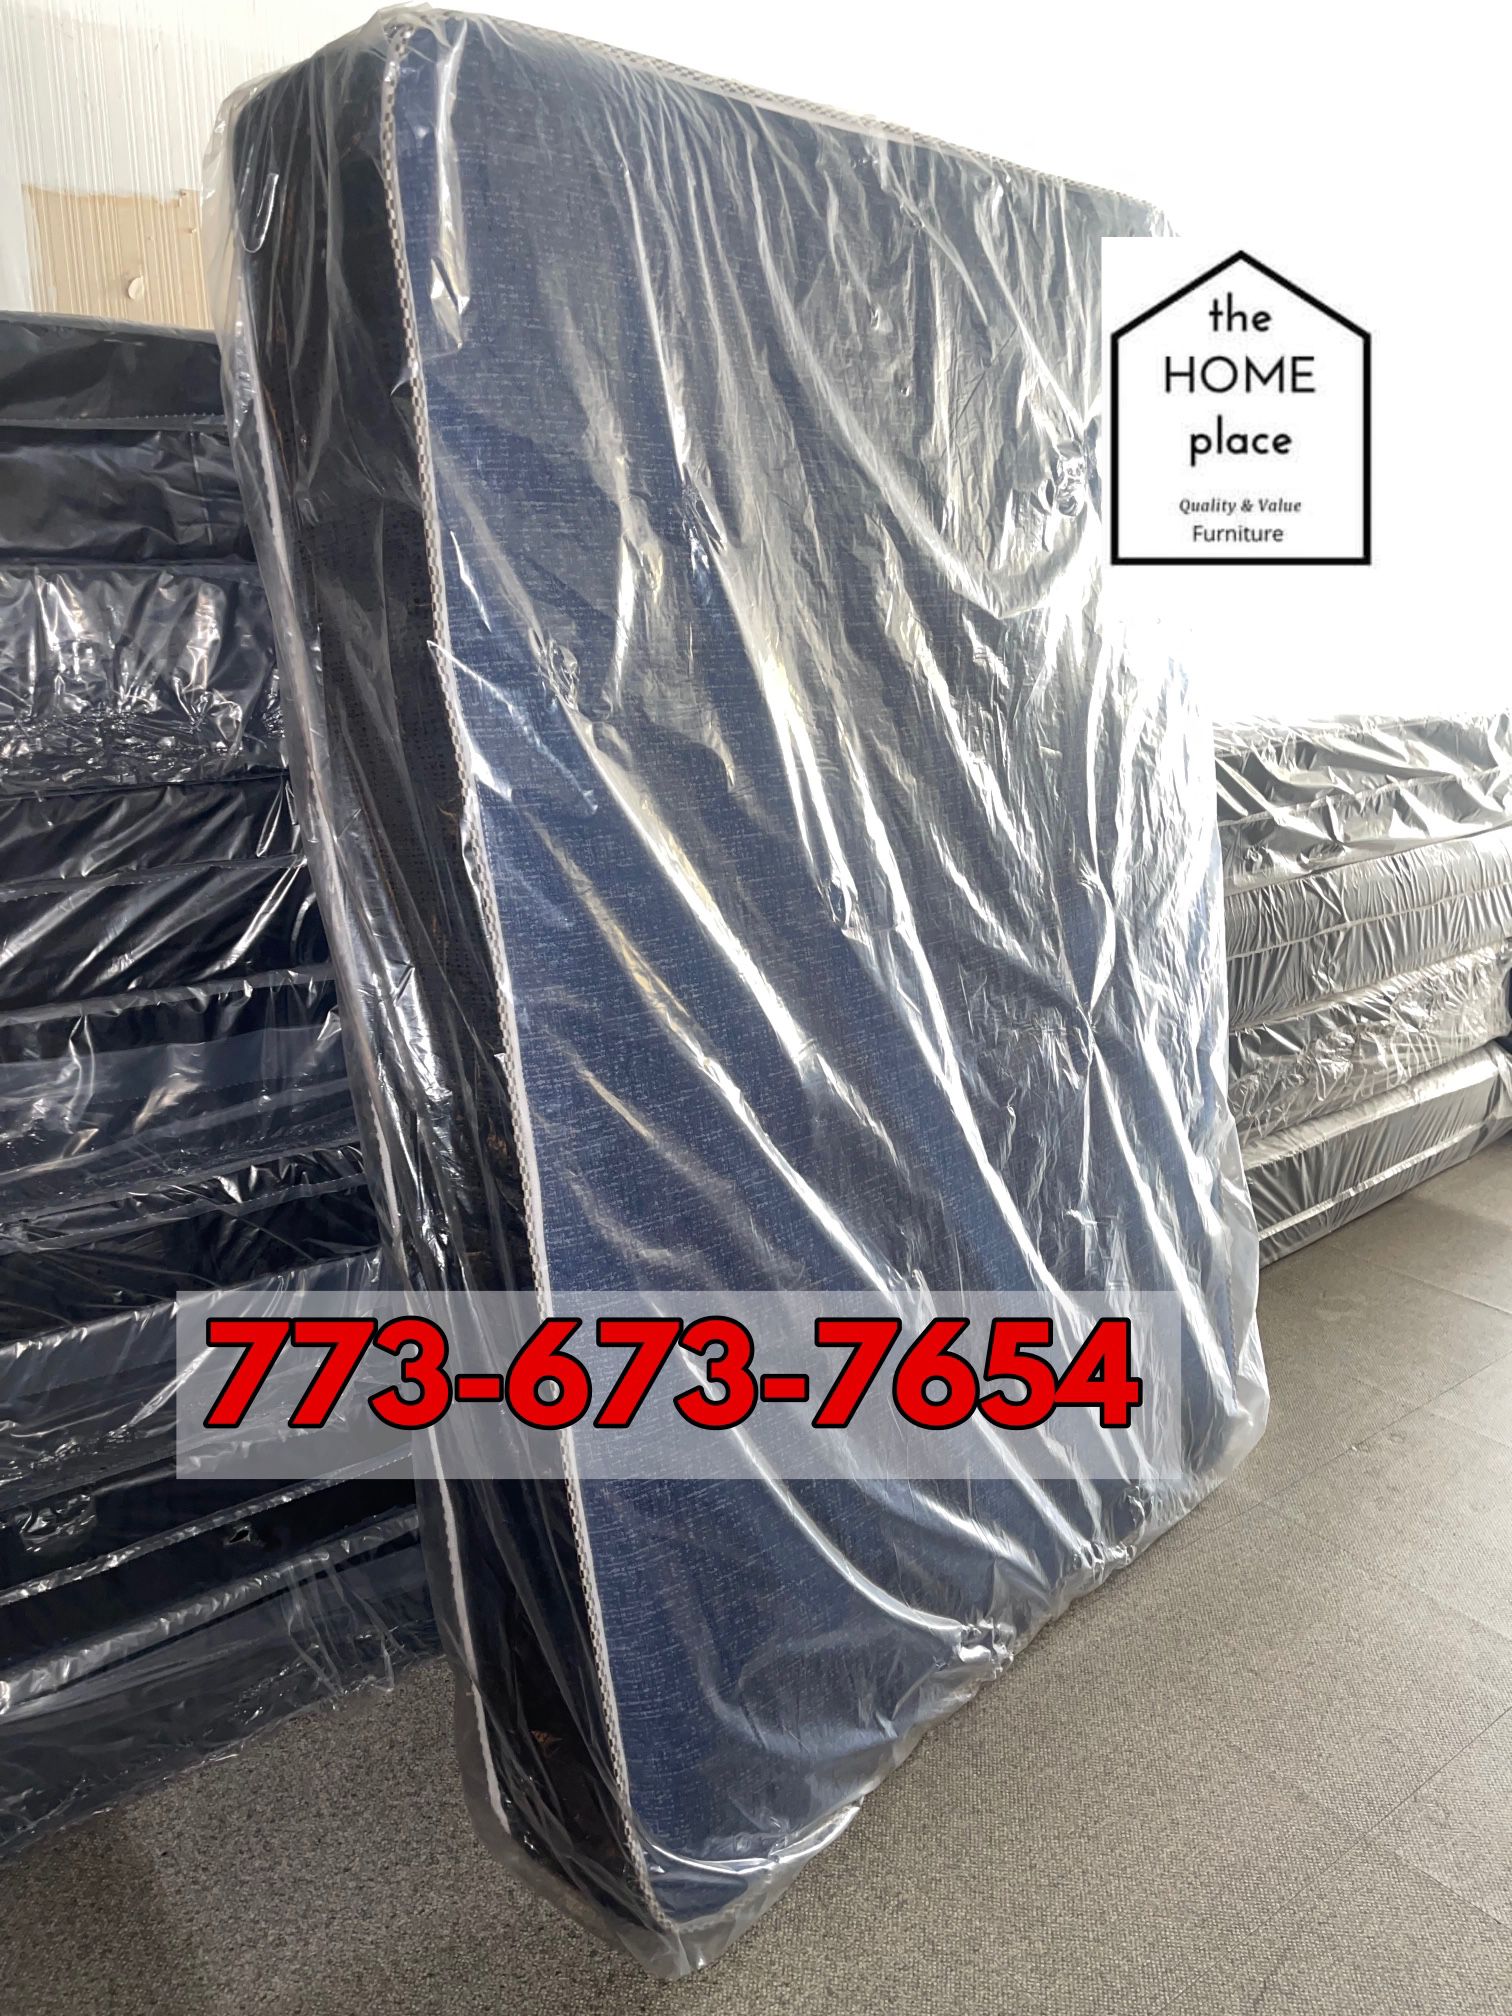 🚨 Top Quality Brand New Mattresses 🚨 Ready for DELIVERY TODAY!!! 🚛